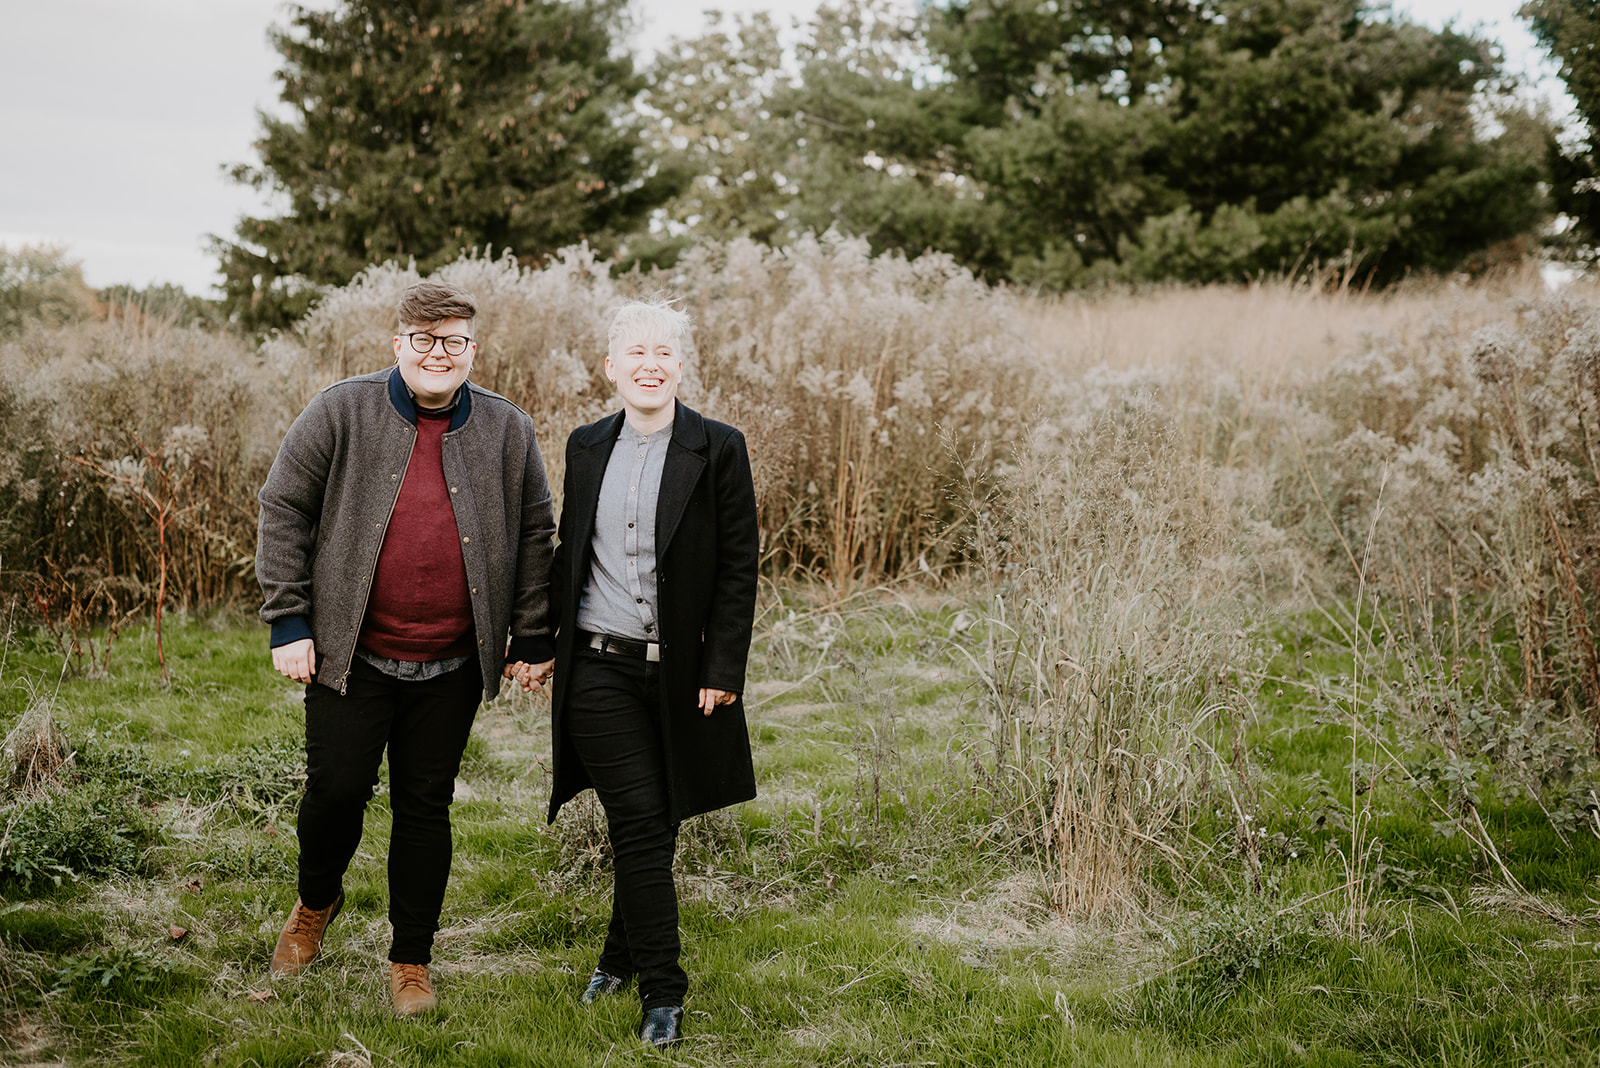 grand rapids engagement session with trans couple non binary photographer in Michigan